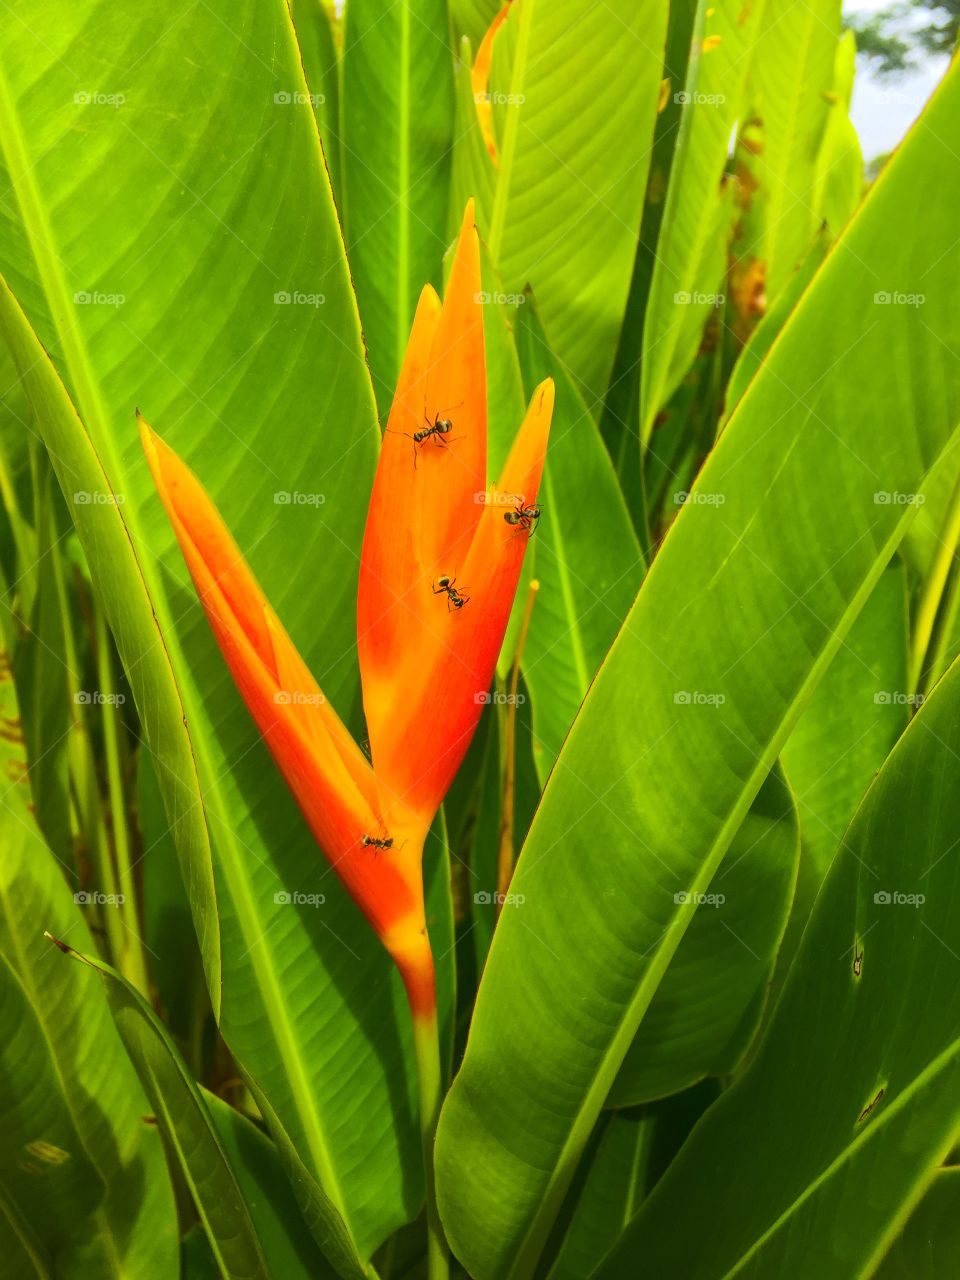 Ants savoring on a bird of paradise flower